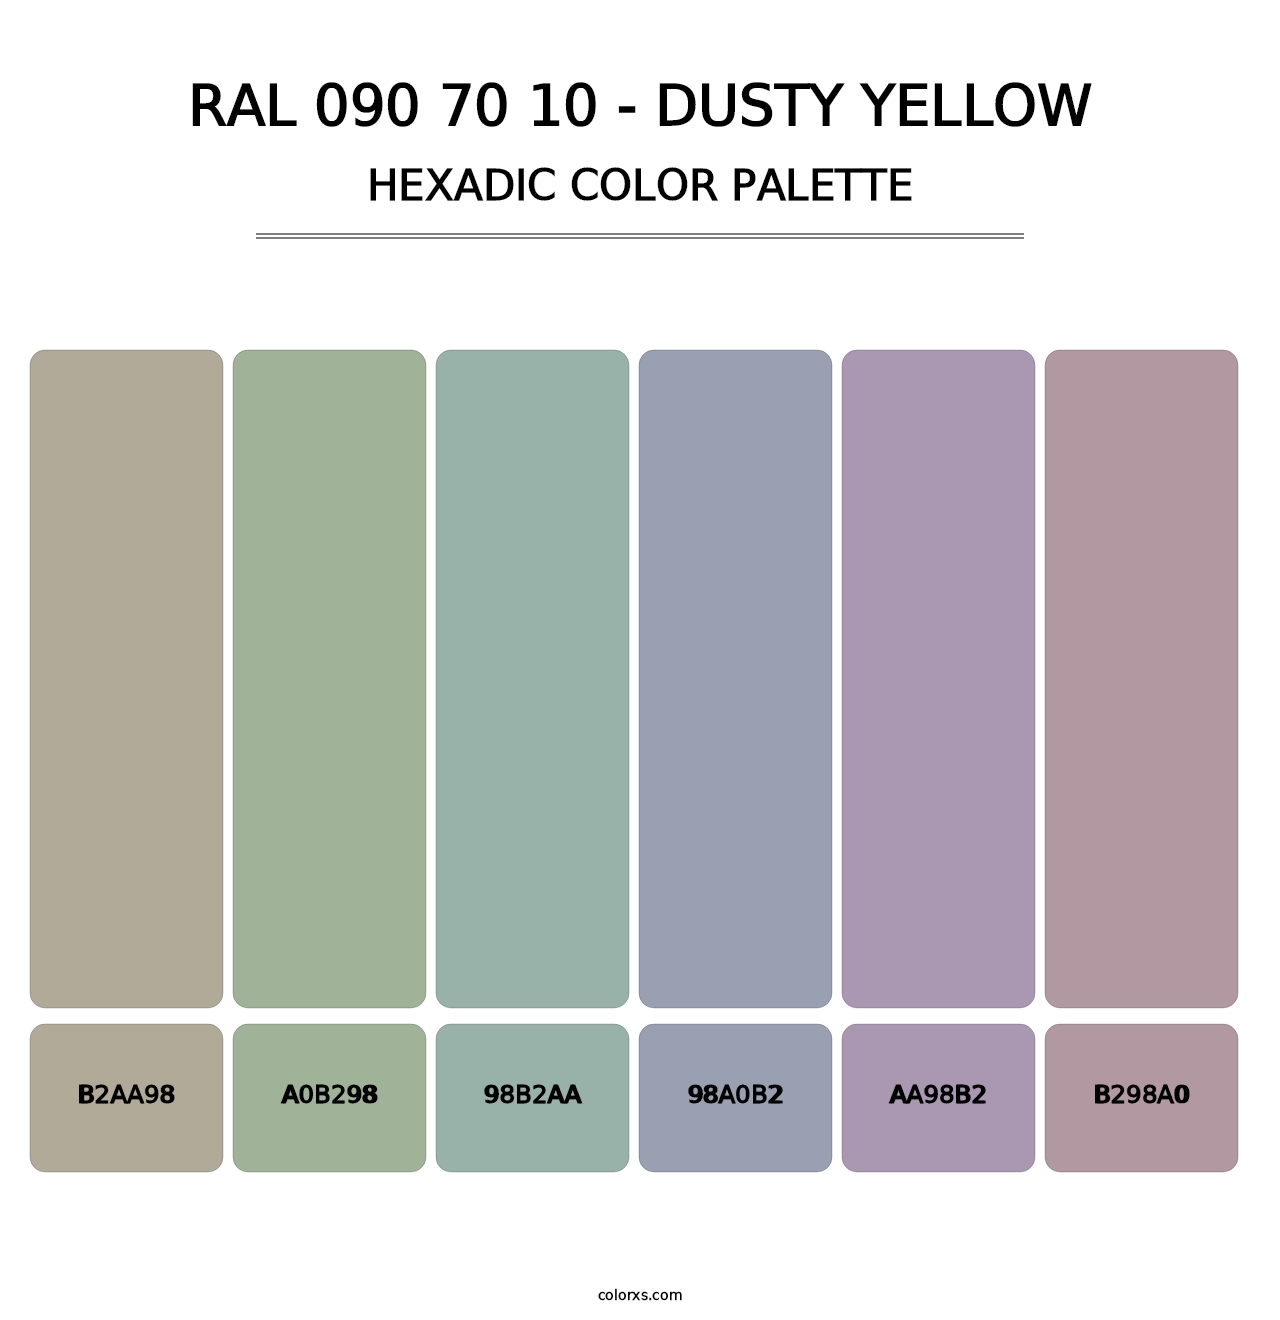 RAL 090 70 10 - Dusty Yellow - Hexadic Color Palette